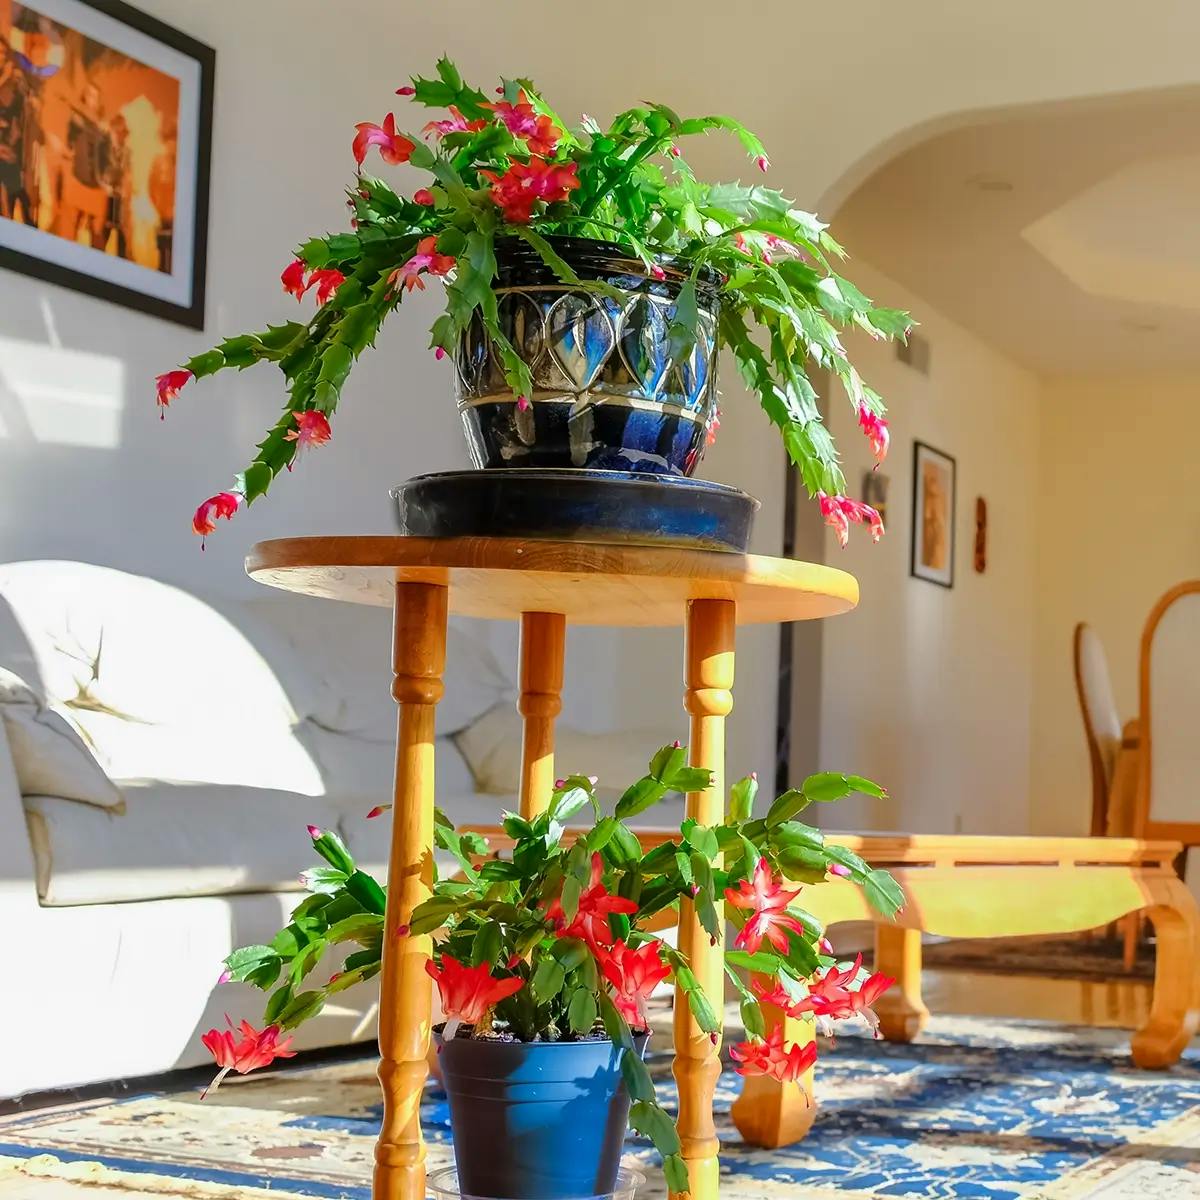 Two red Christmas cacti in decorative Mexican pots, on shelves in the living room in indirect sunlight